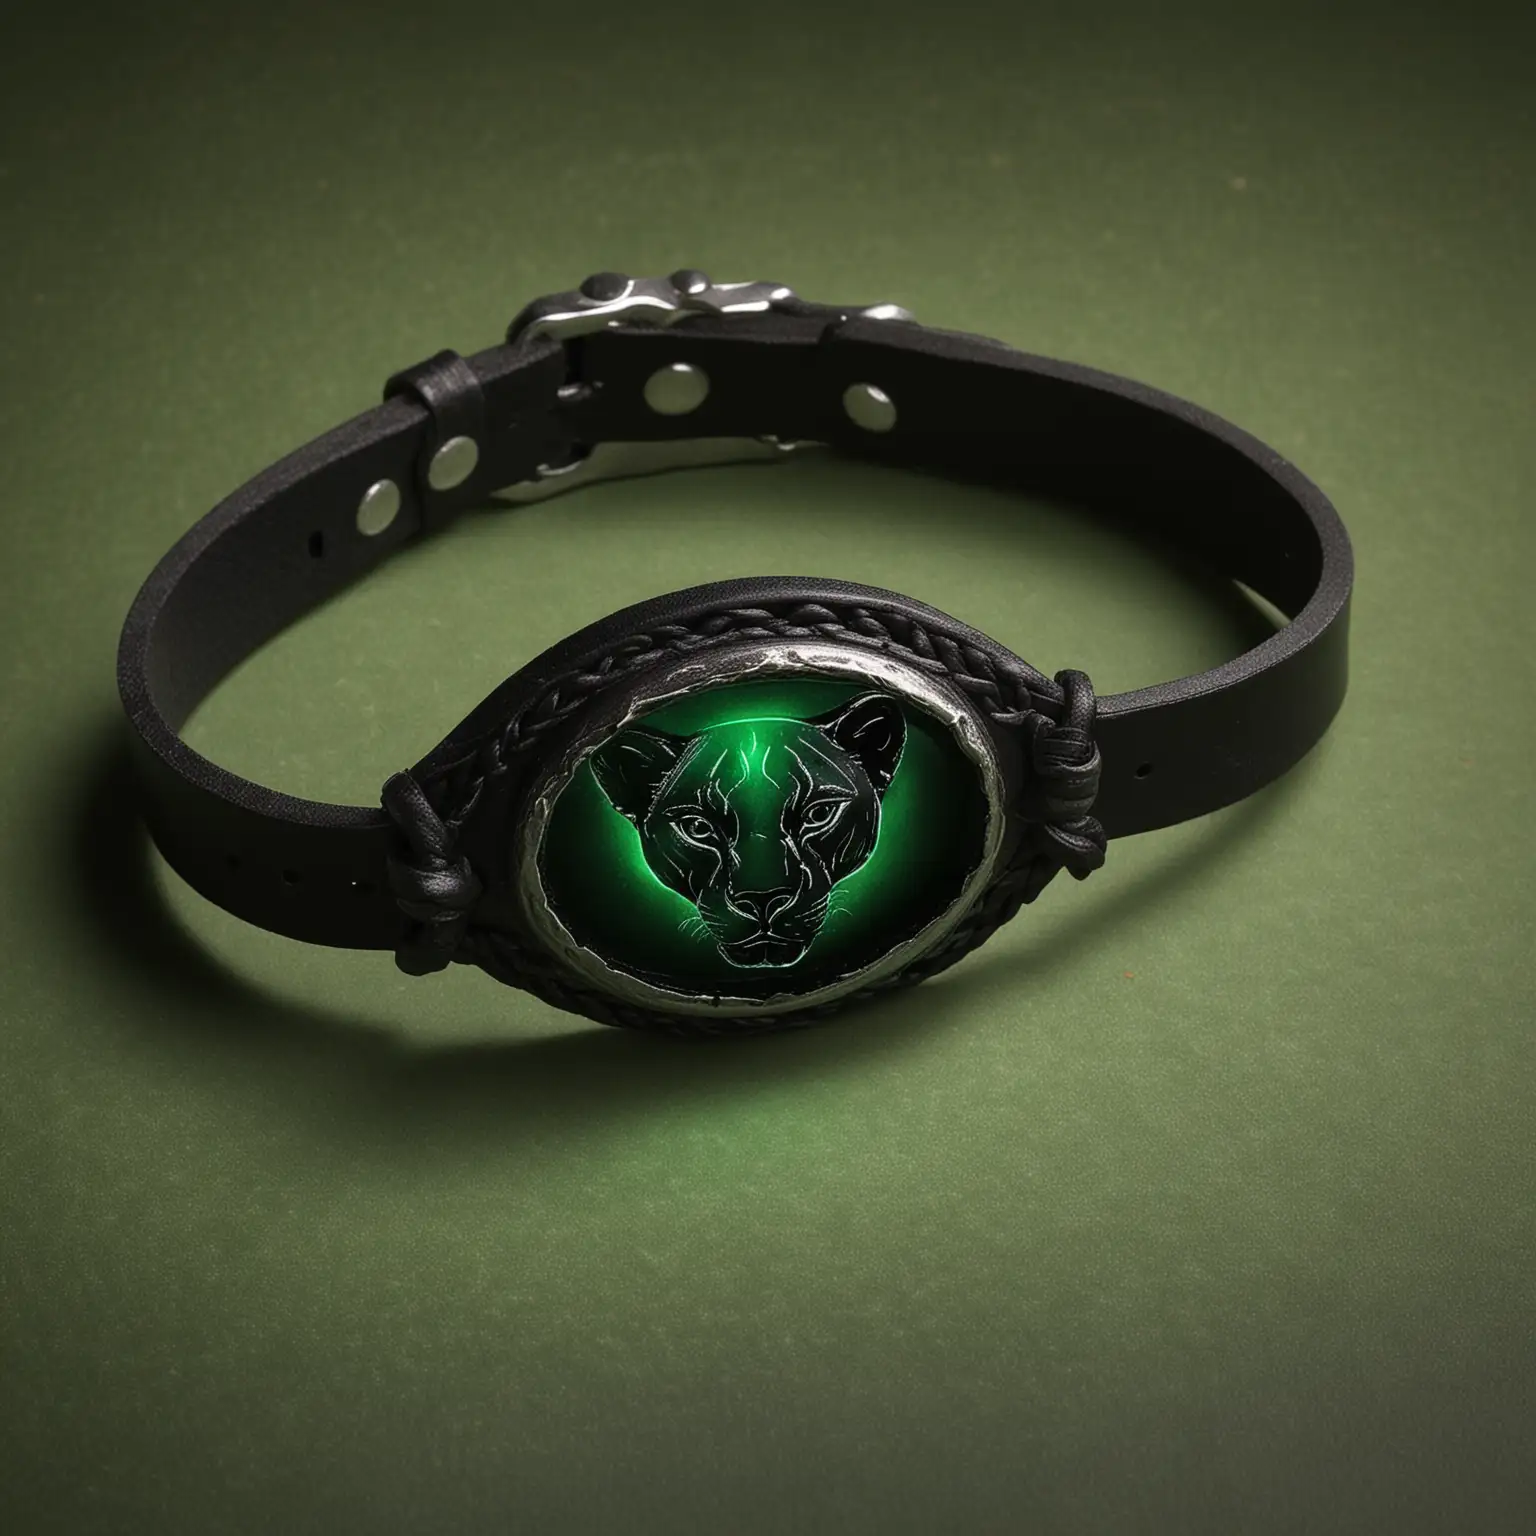 make a black leather wrist band with an oval shaped stone in the center, the oval shaped stone has a green glow in the background with the face of a panther in the center 